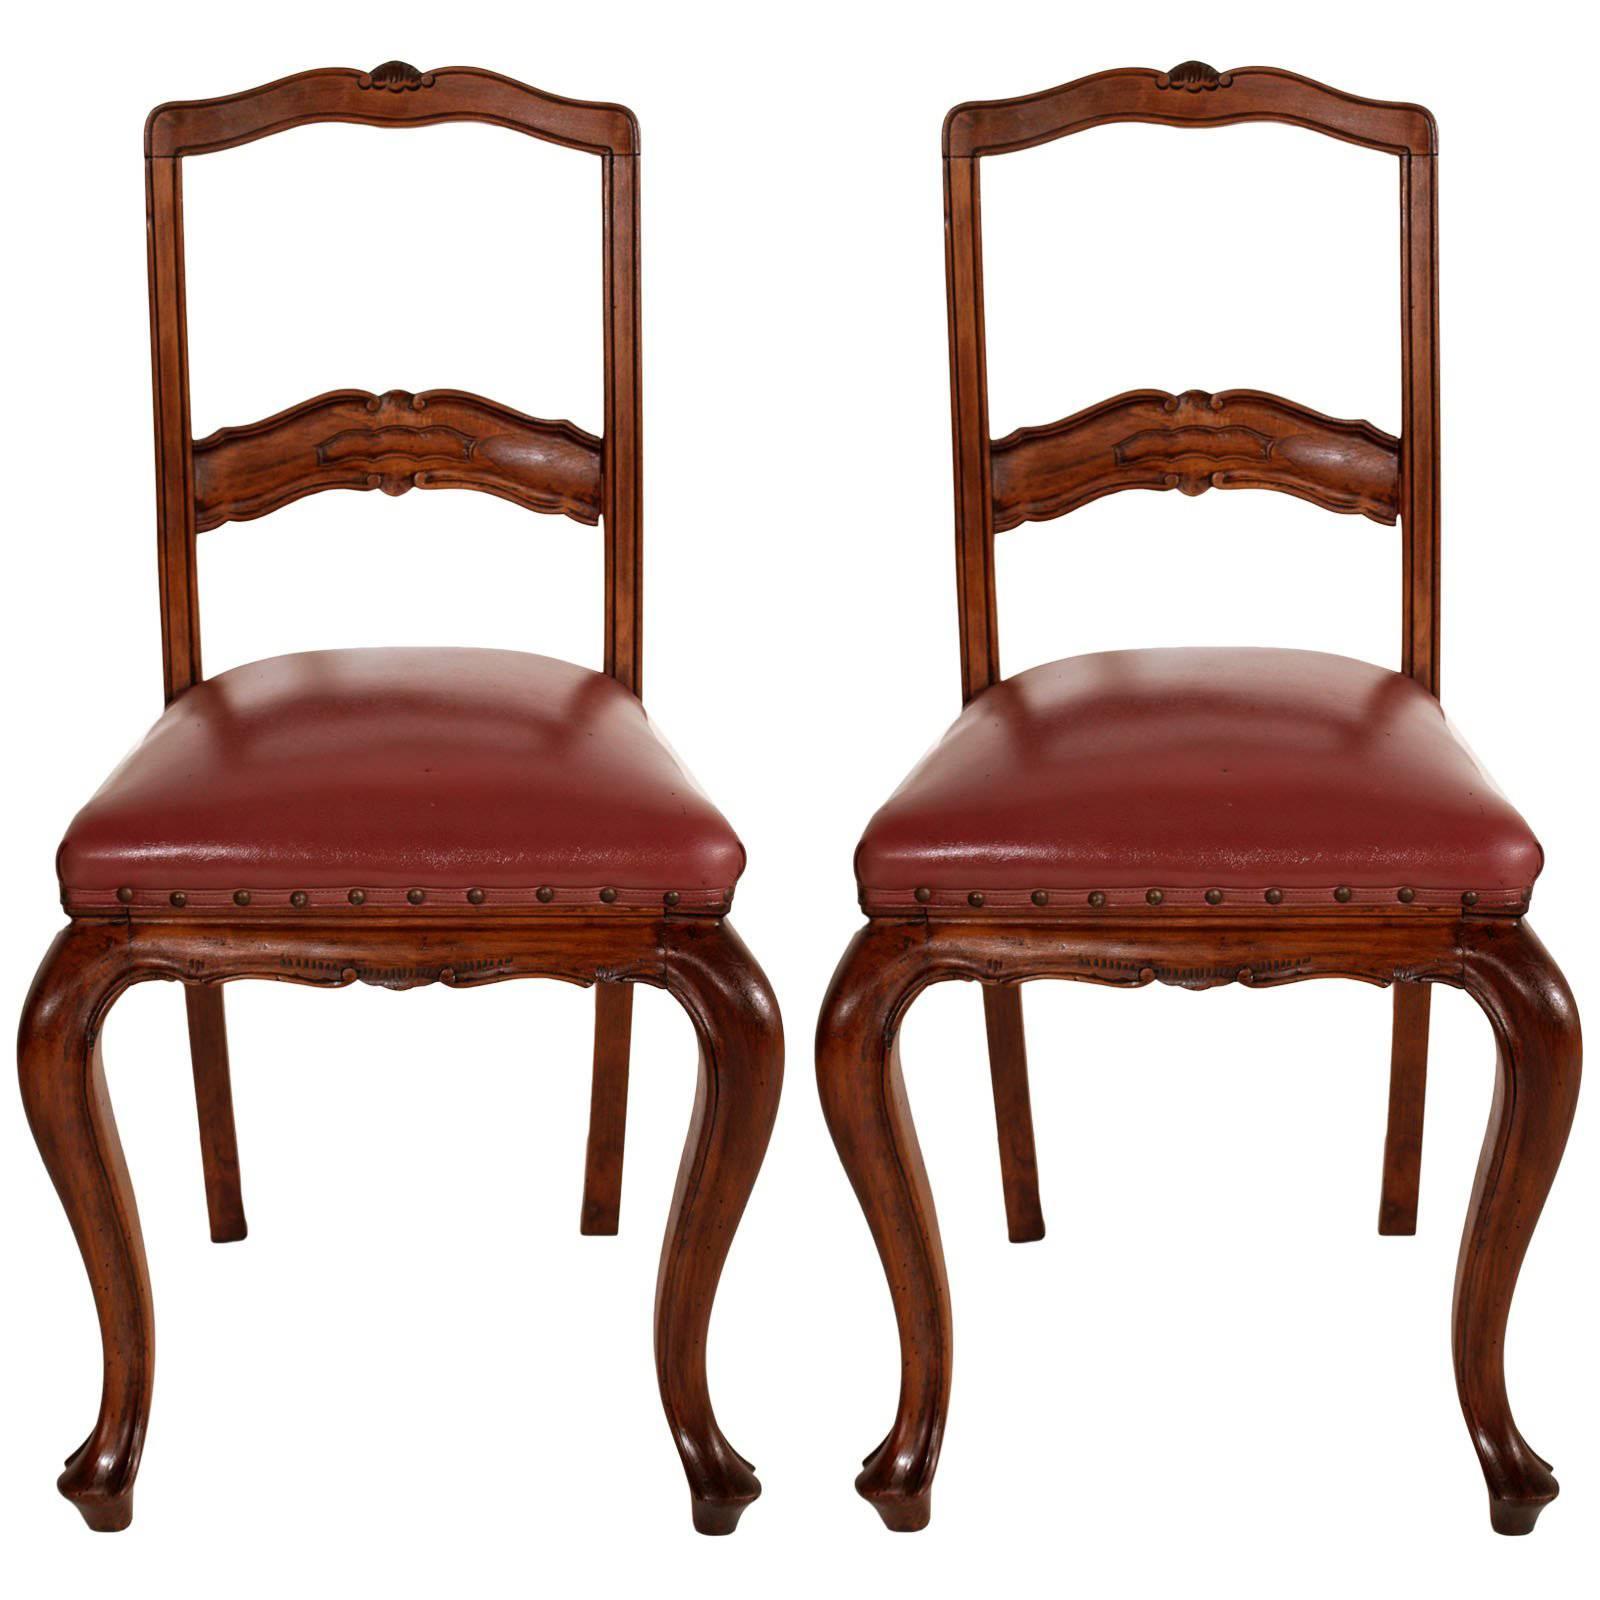 Pair Art Nouveau Neoclassical Chairs , Hand-Carved Walnut, Spring Leather Seat For Sale